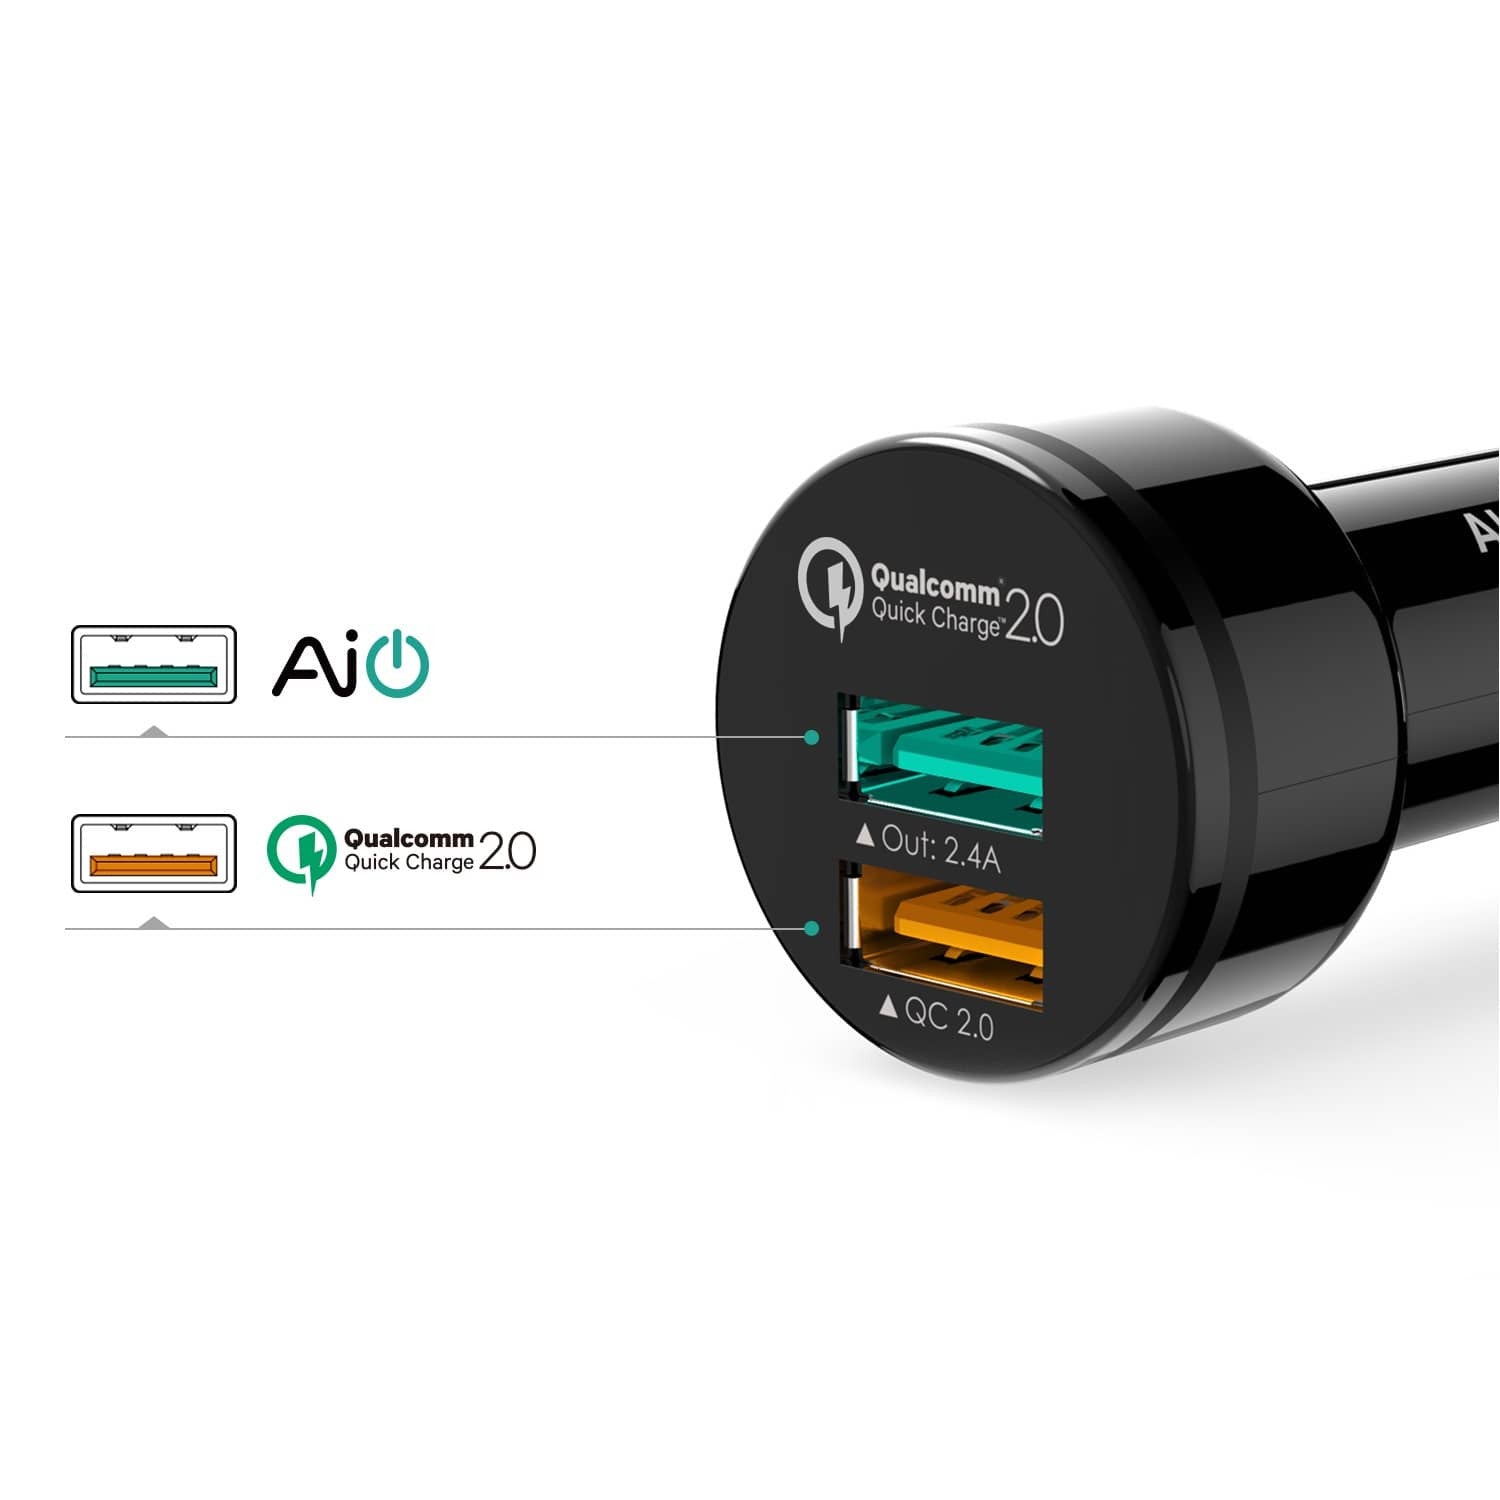 AUKEY CC-T1 Qualcomm Quick Charge 2.0 30W 2 Port USB Car Charger - Aukey Malaysia Official Store